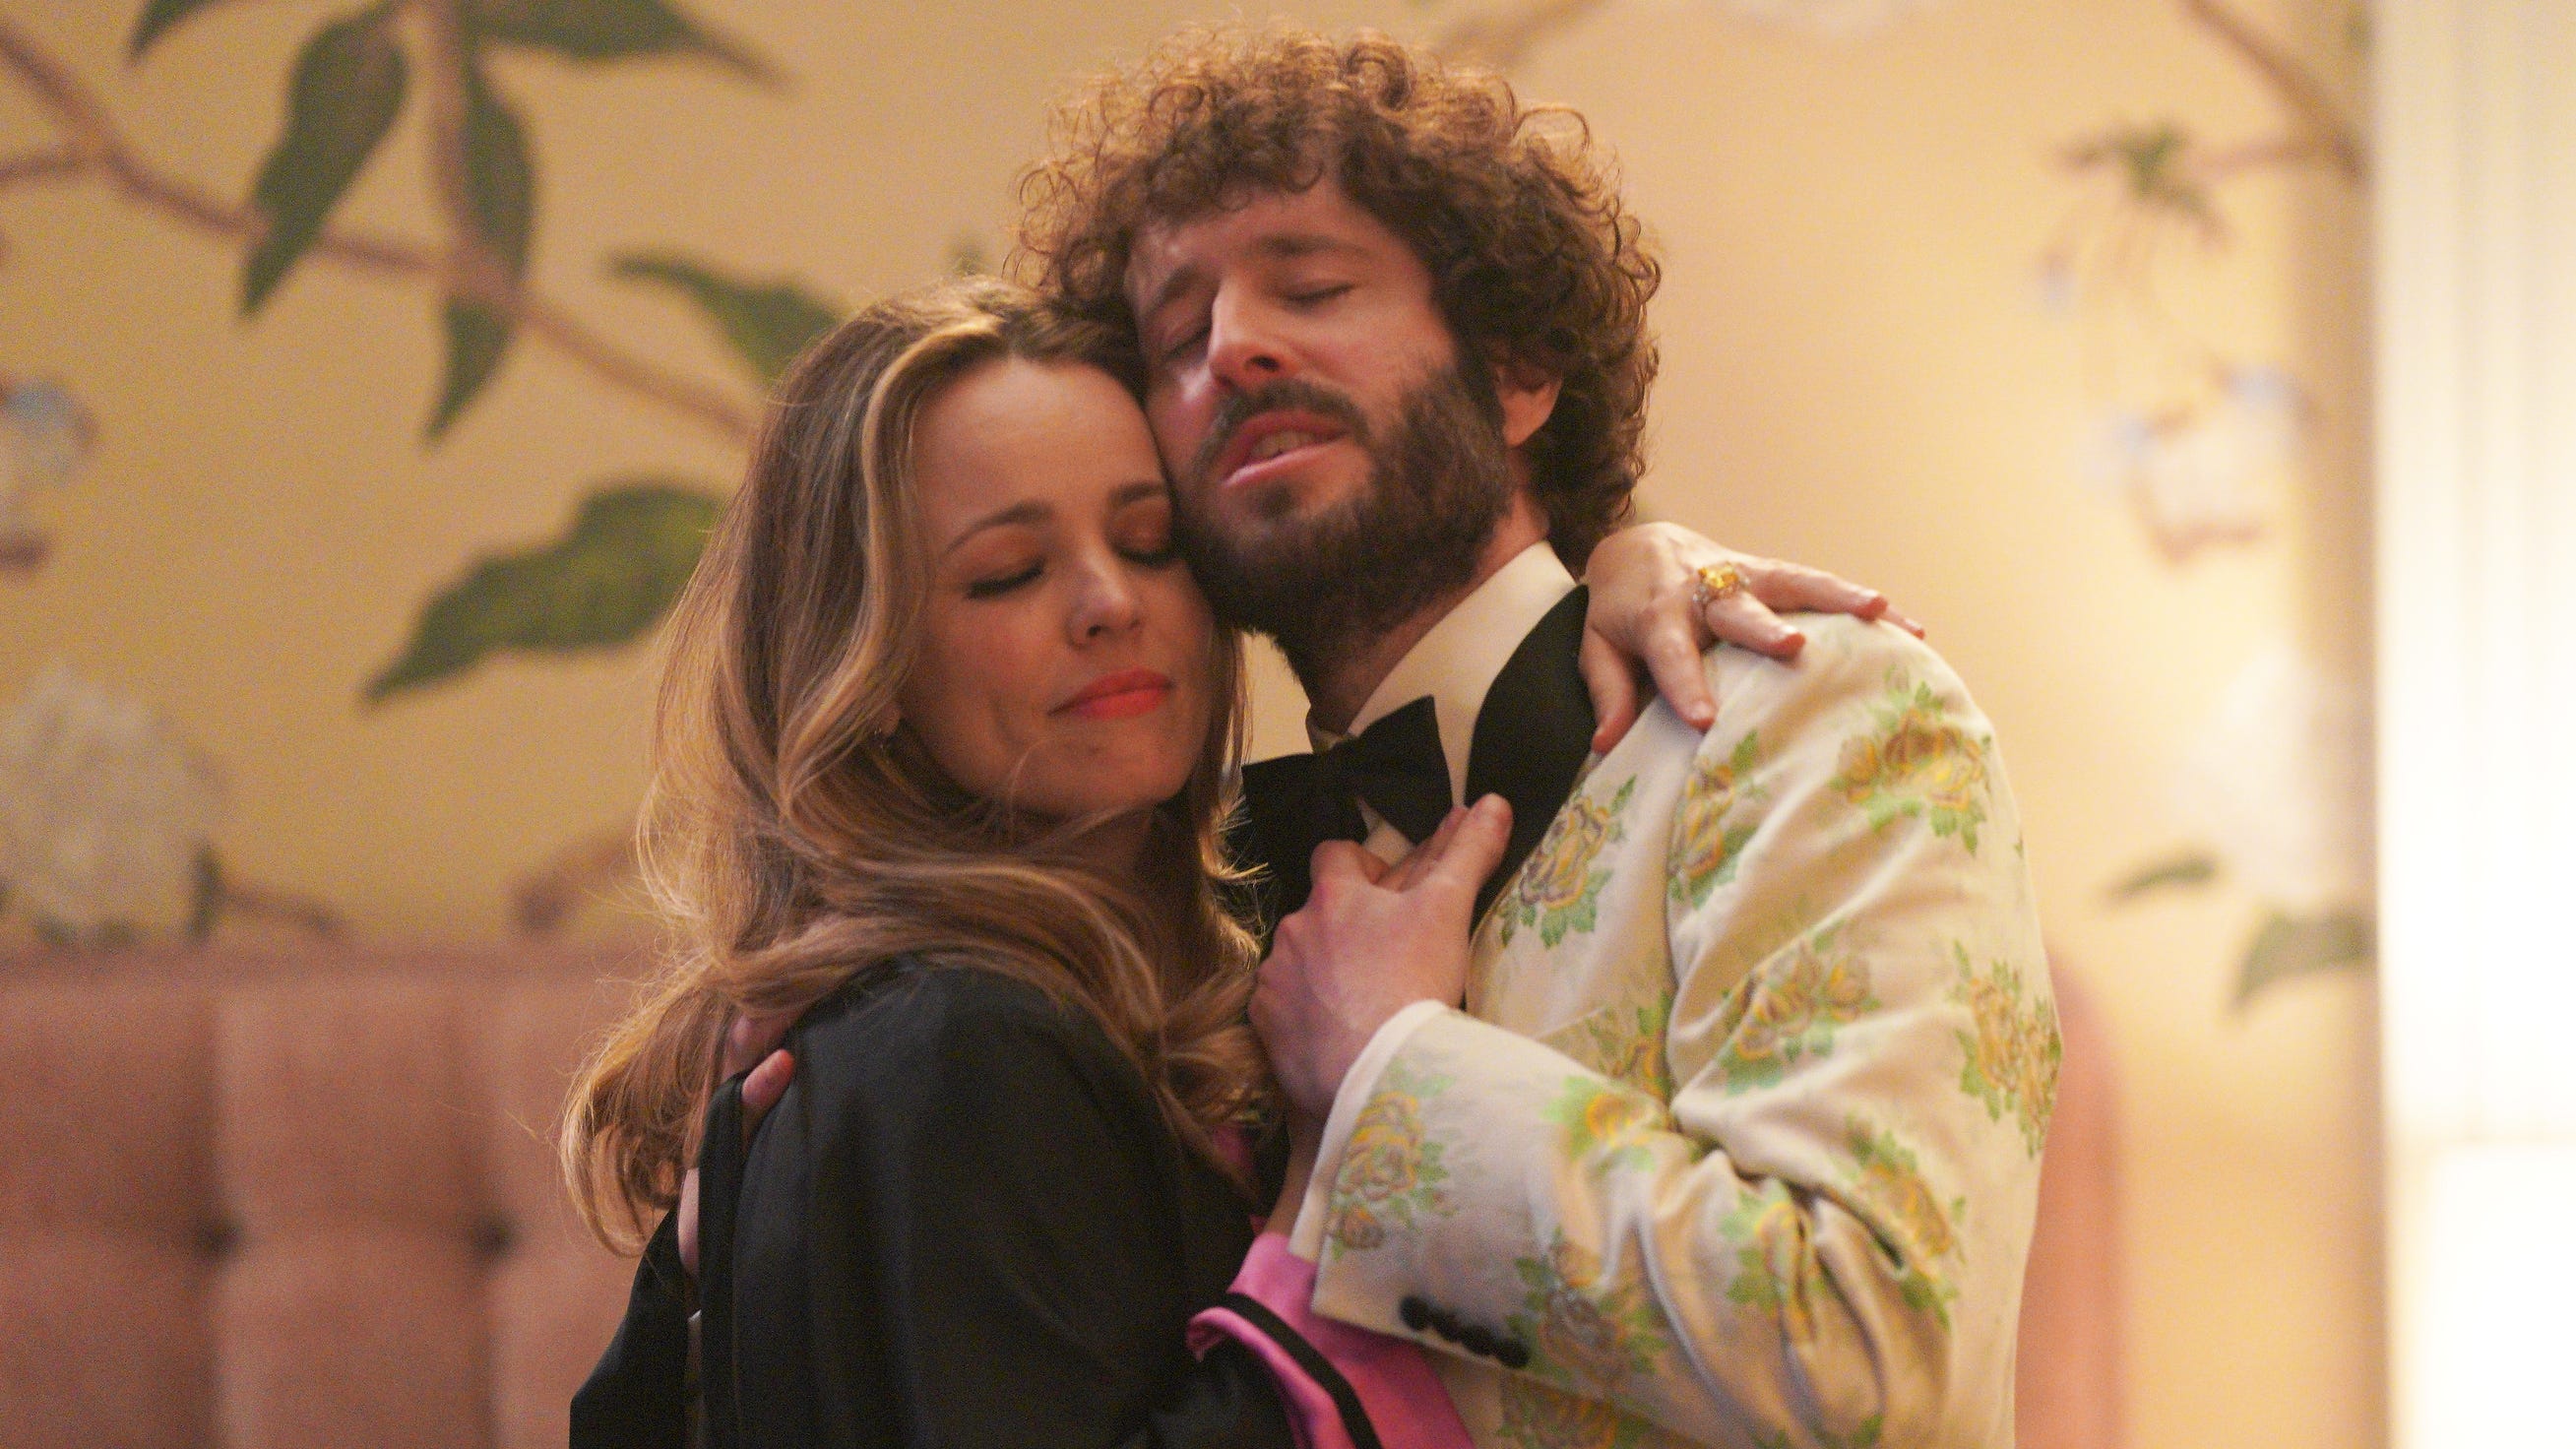 "Dave" co-creator and star David Burd appears with Rachel McAdams in a music video shoot for his character's song.